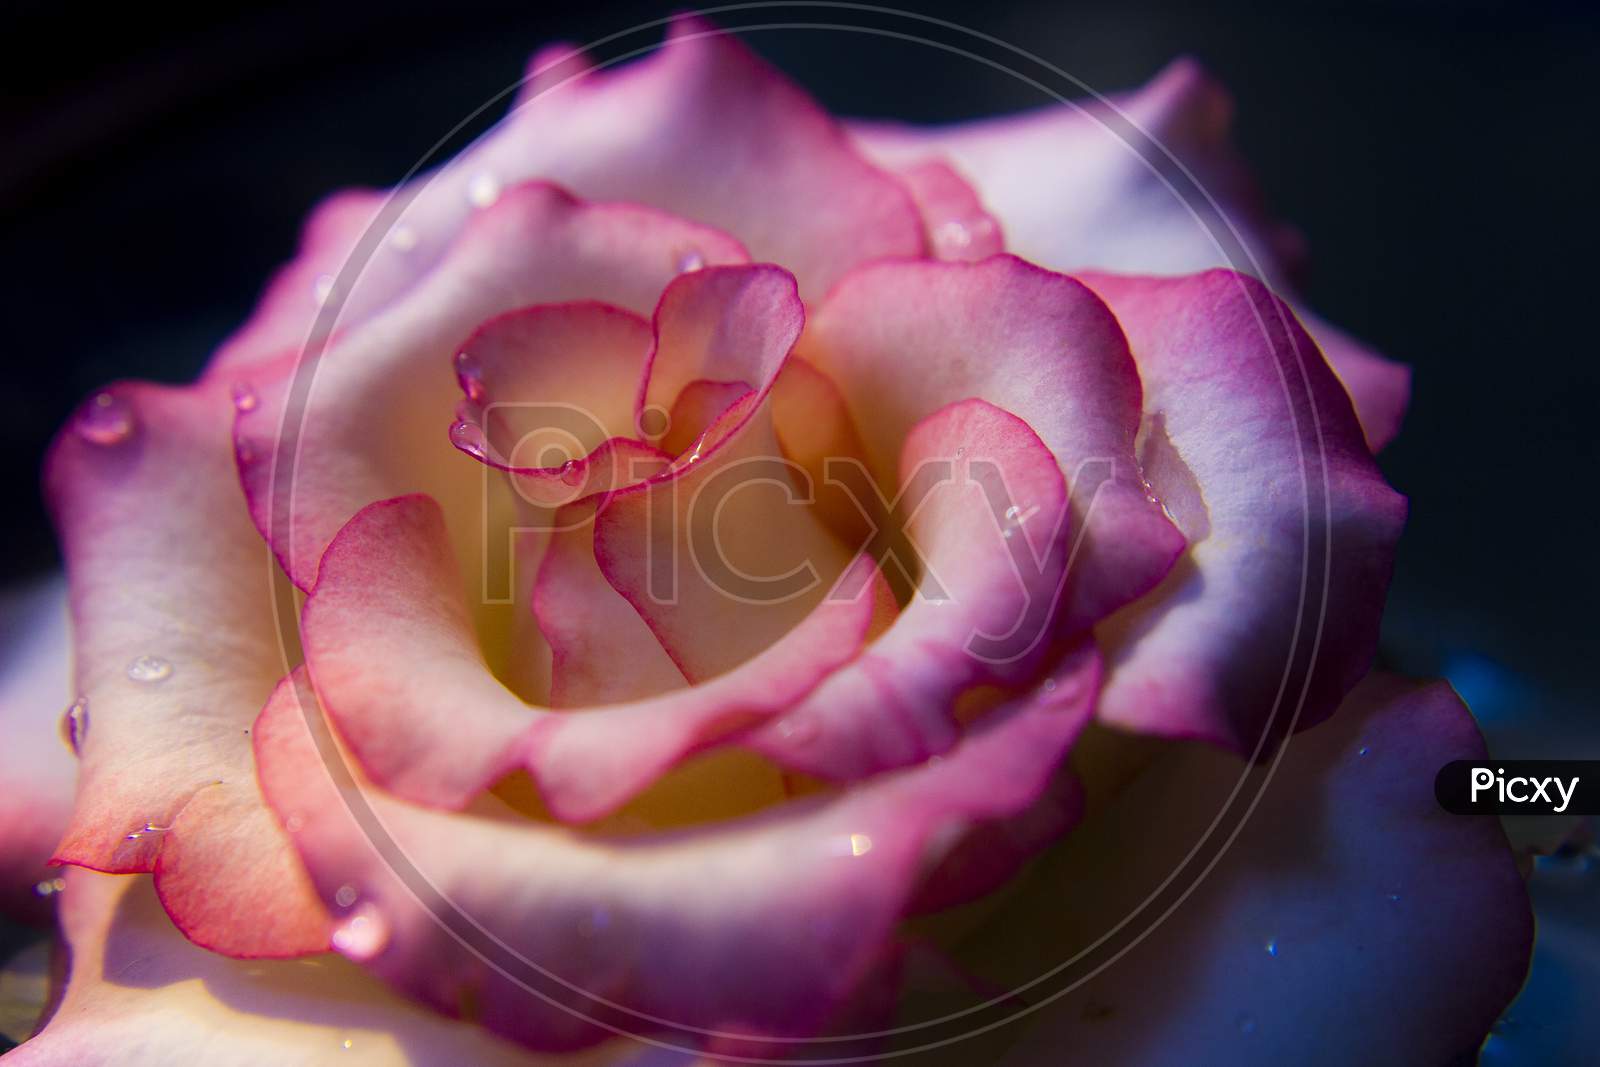 White and pink rose close-up with water drops